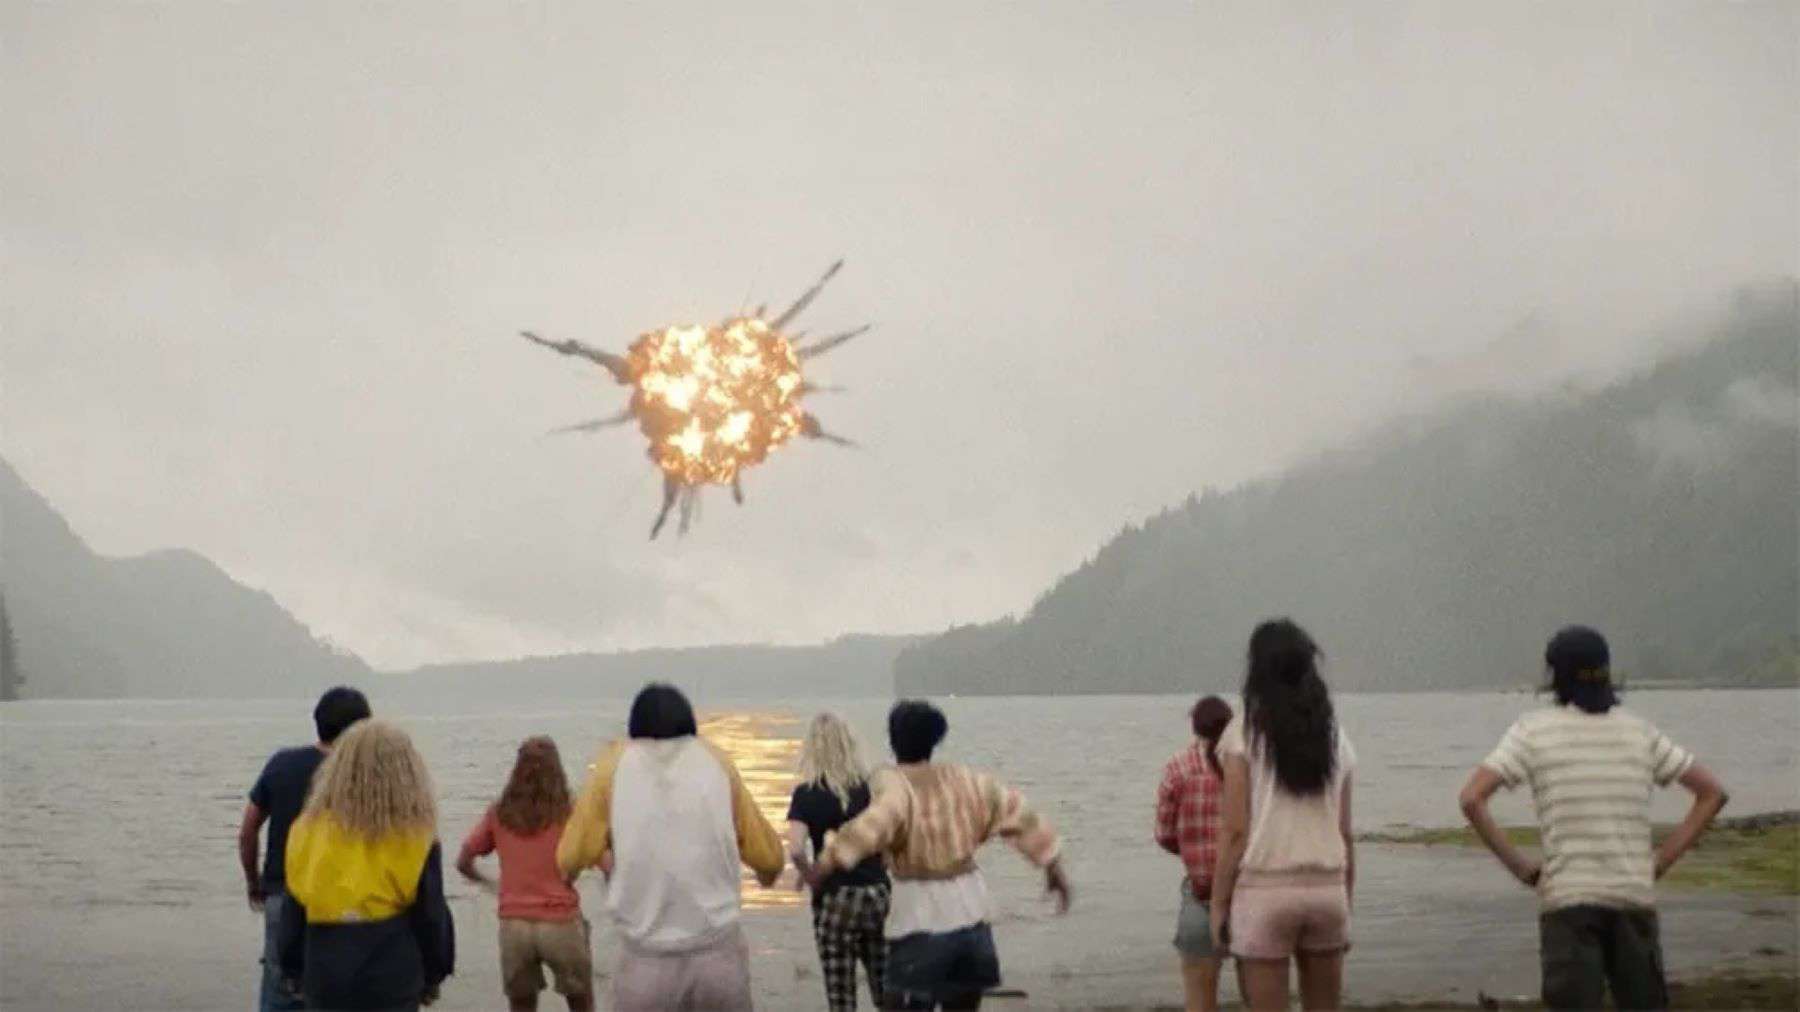 A group of teenagers view an explosion in the sky in this photo by Showtime.